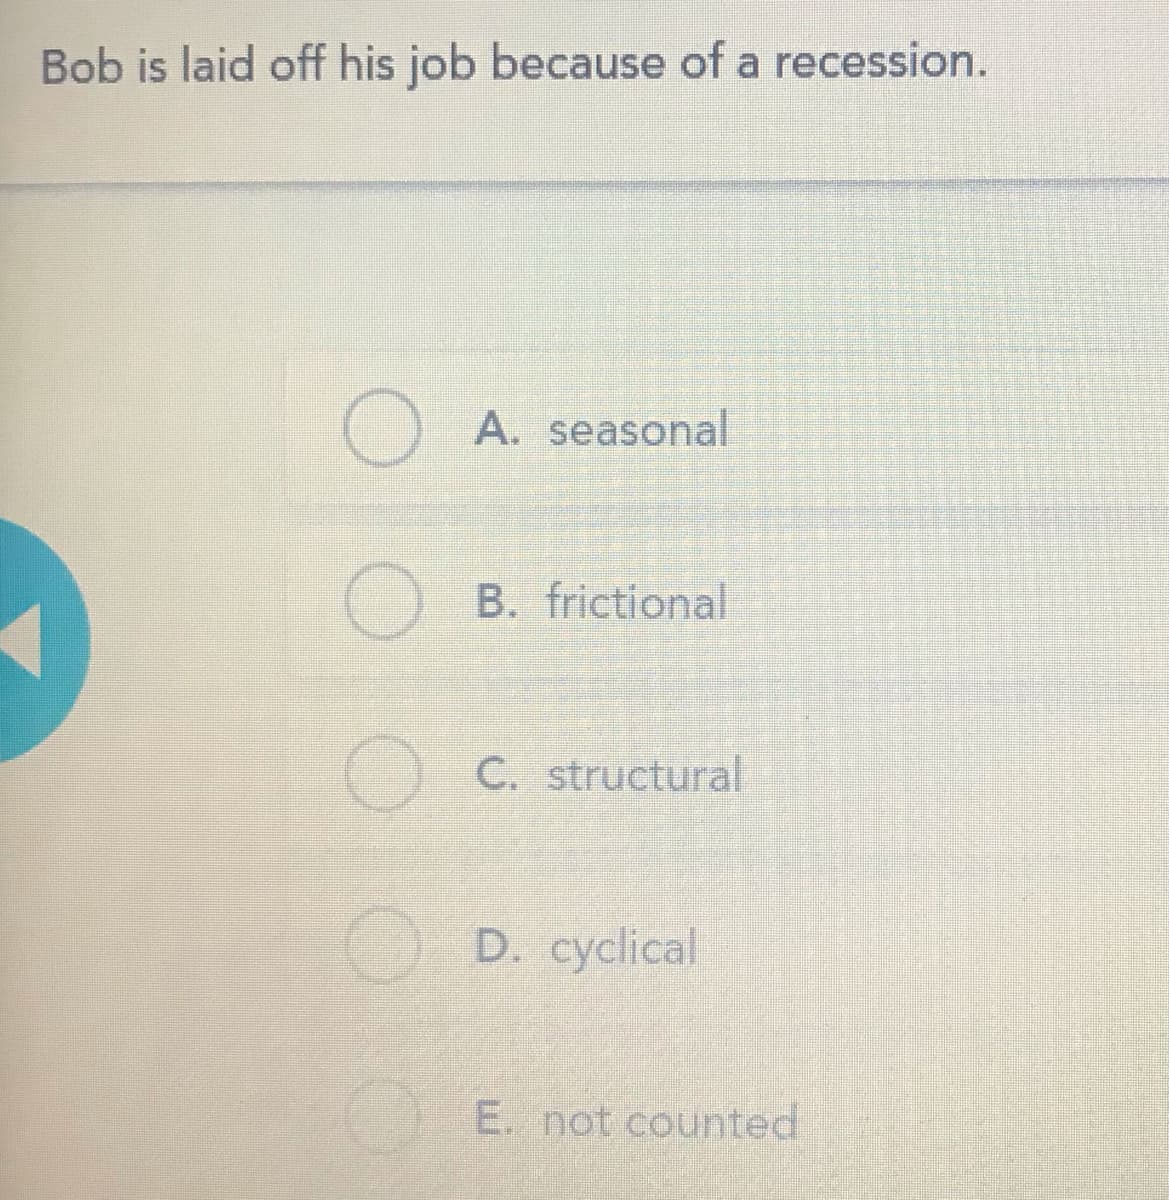 Bob is laid off his job because of a recession.
O A. seasonal
O B. frictional
C. structural
O D. cyclical
E. not counted
